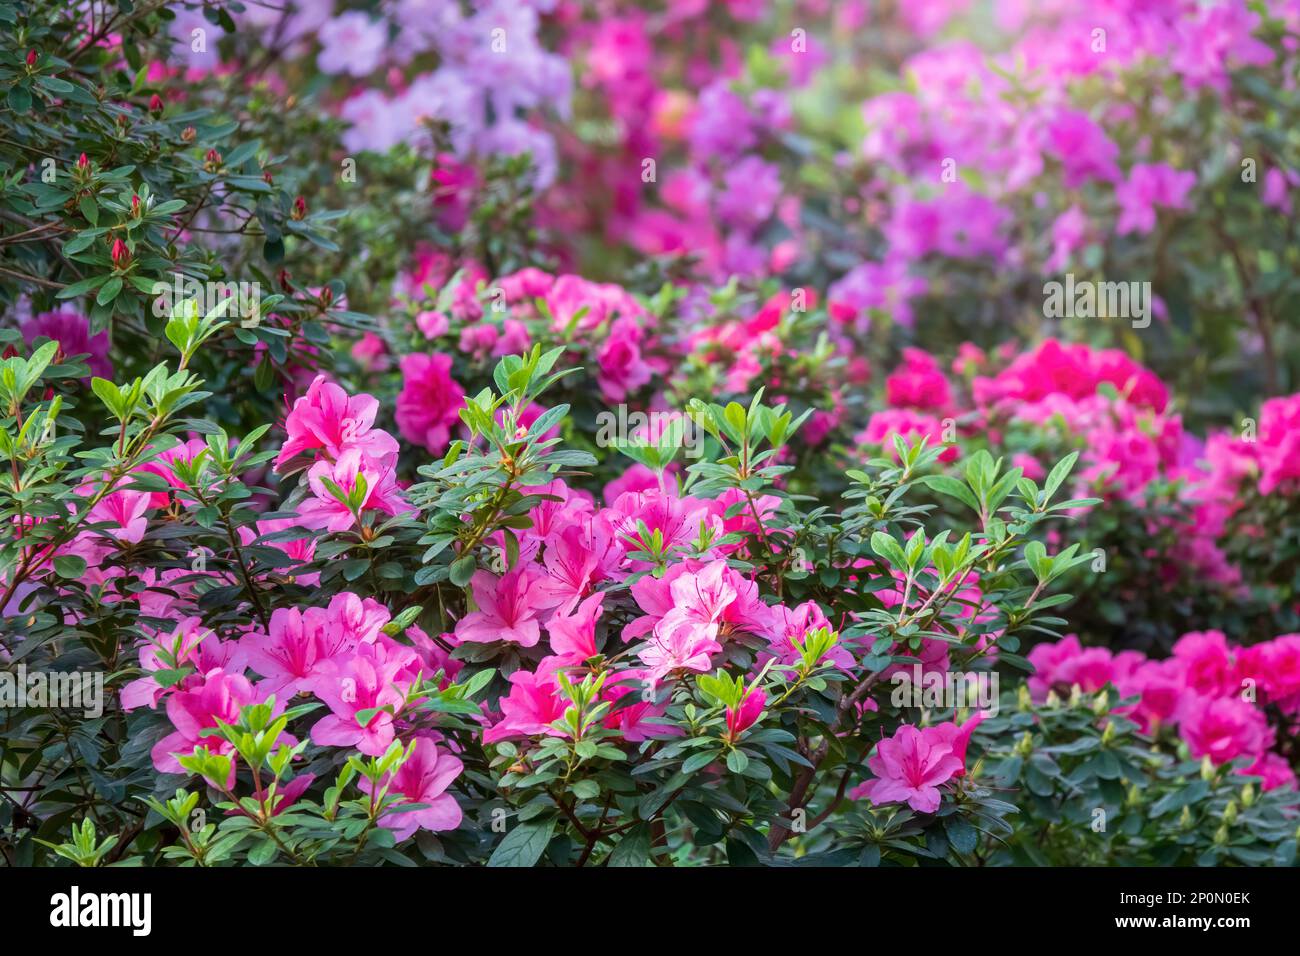 Colorful flower garden. Blooming azalea and rhododendron flowers. Selective focus Stock Photo